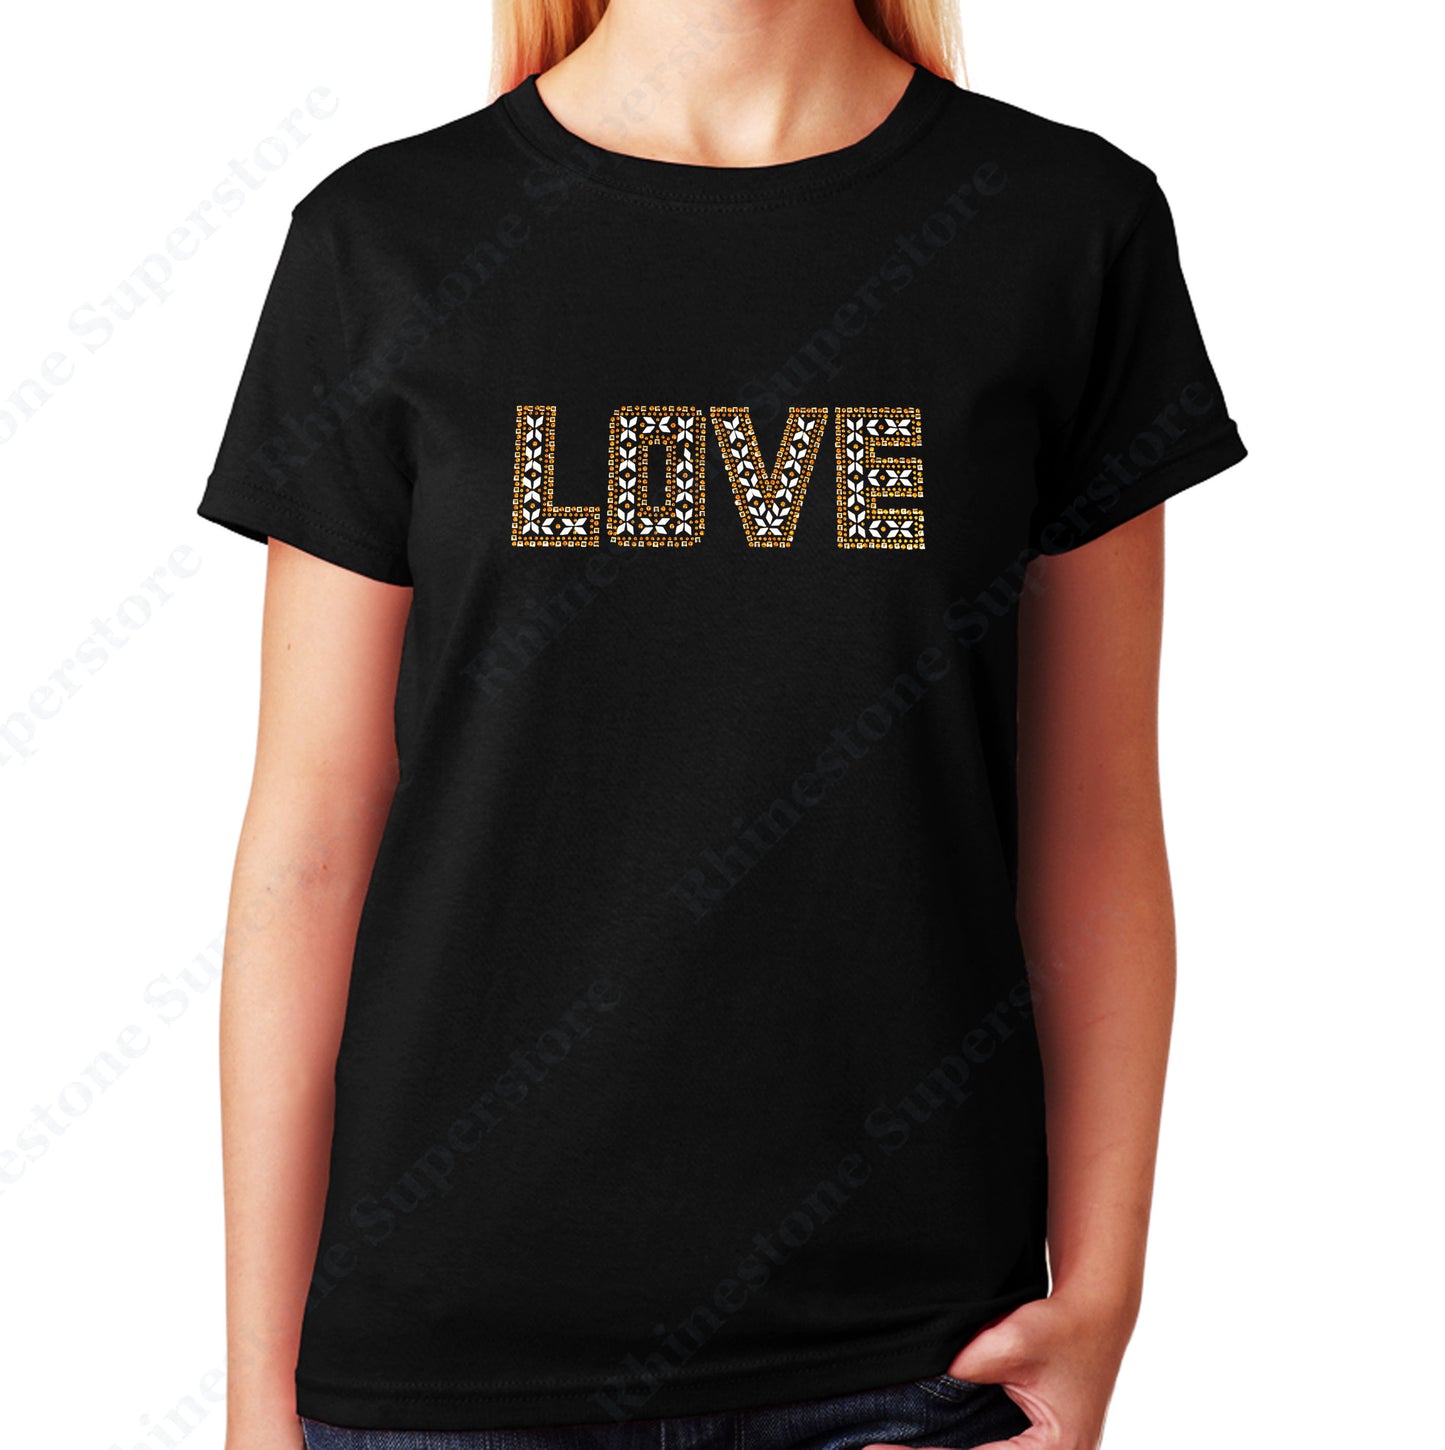 Women's / Unisex T-Shirt with Gold Love in Rhinestuds